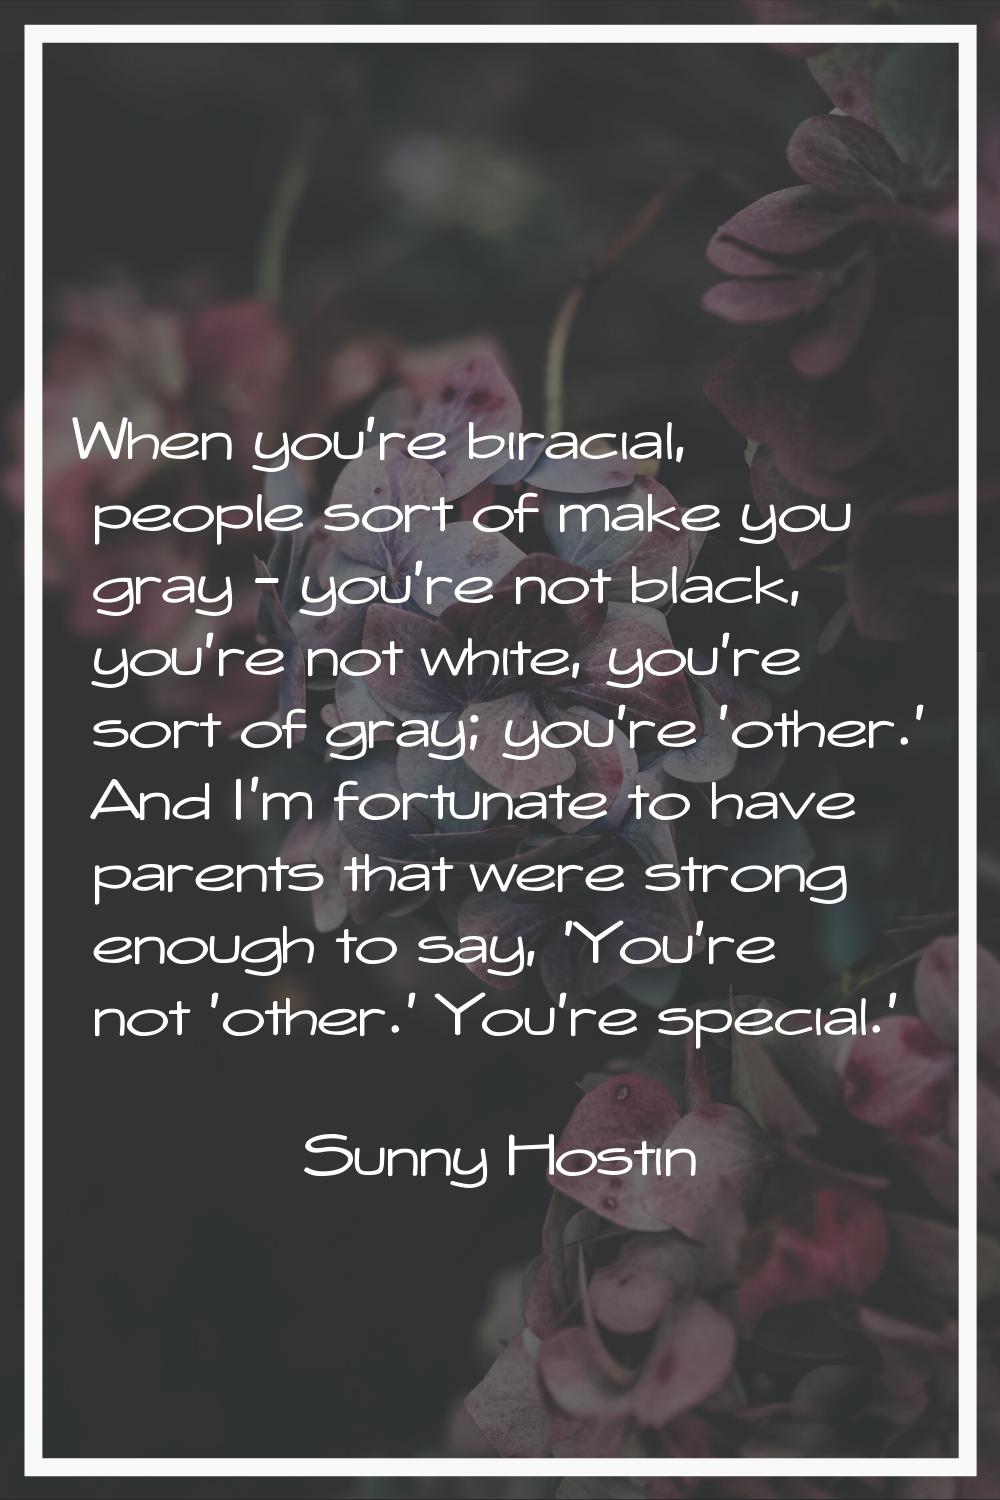 When you're biracial, people sort of make you gray - you're not black, you're not white, you're sor